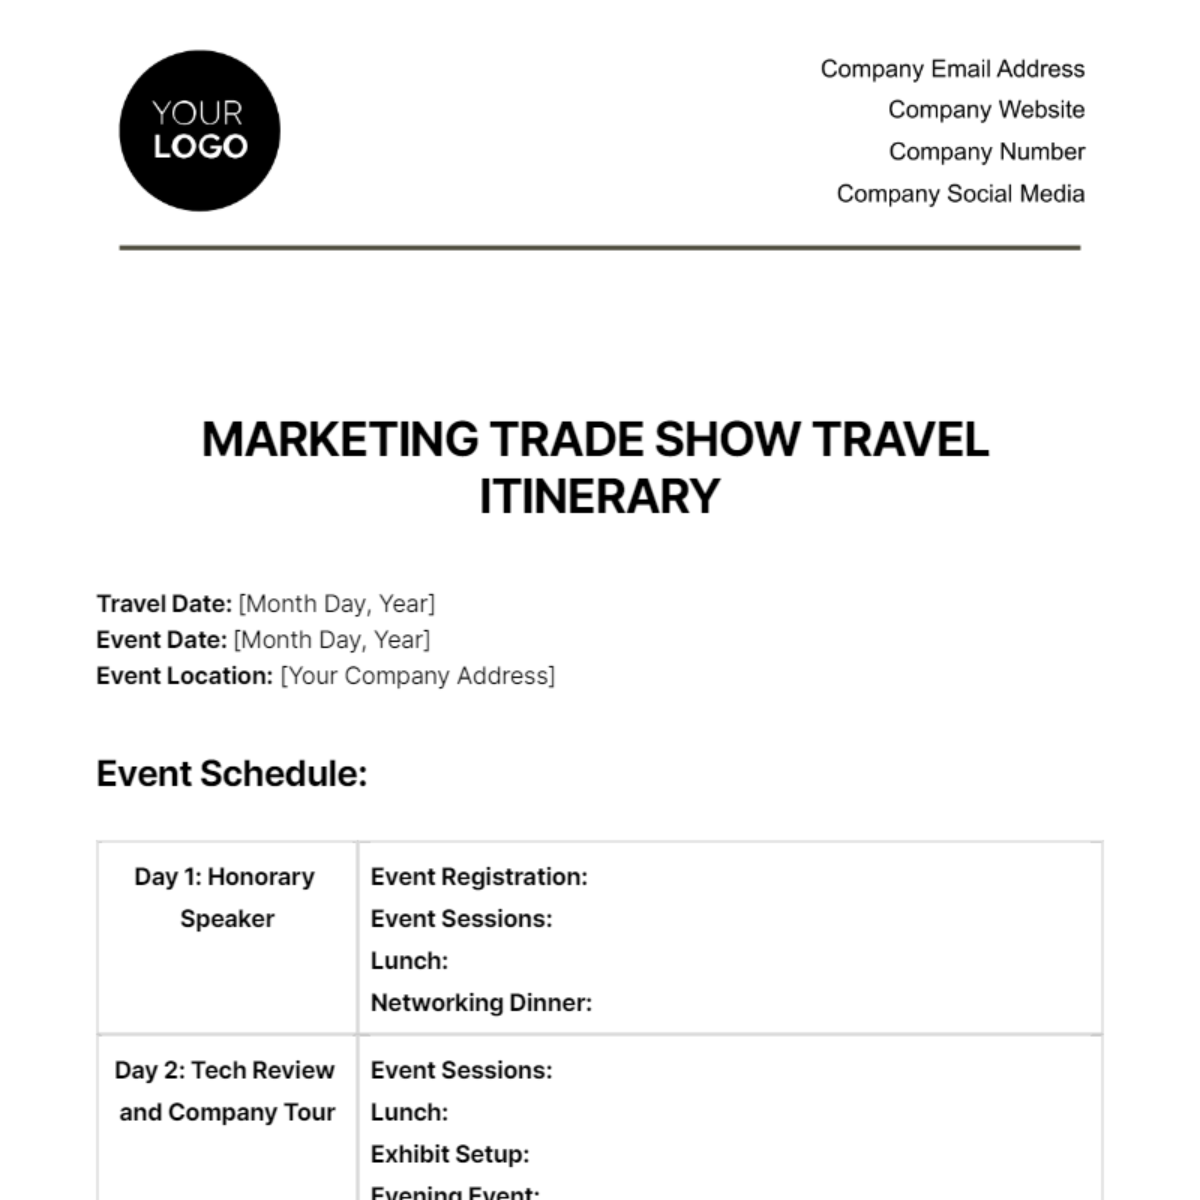 Marketing Trade Show Travel Itinerary Template